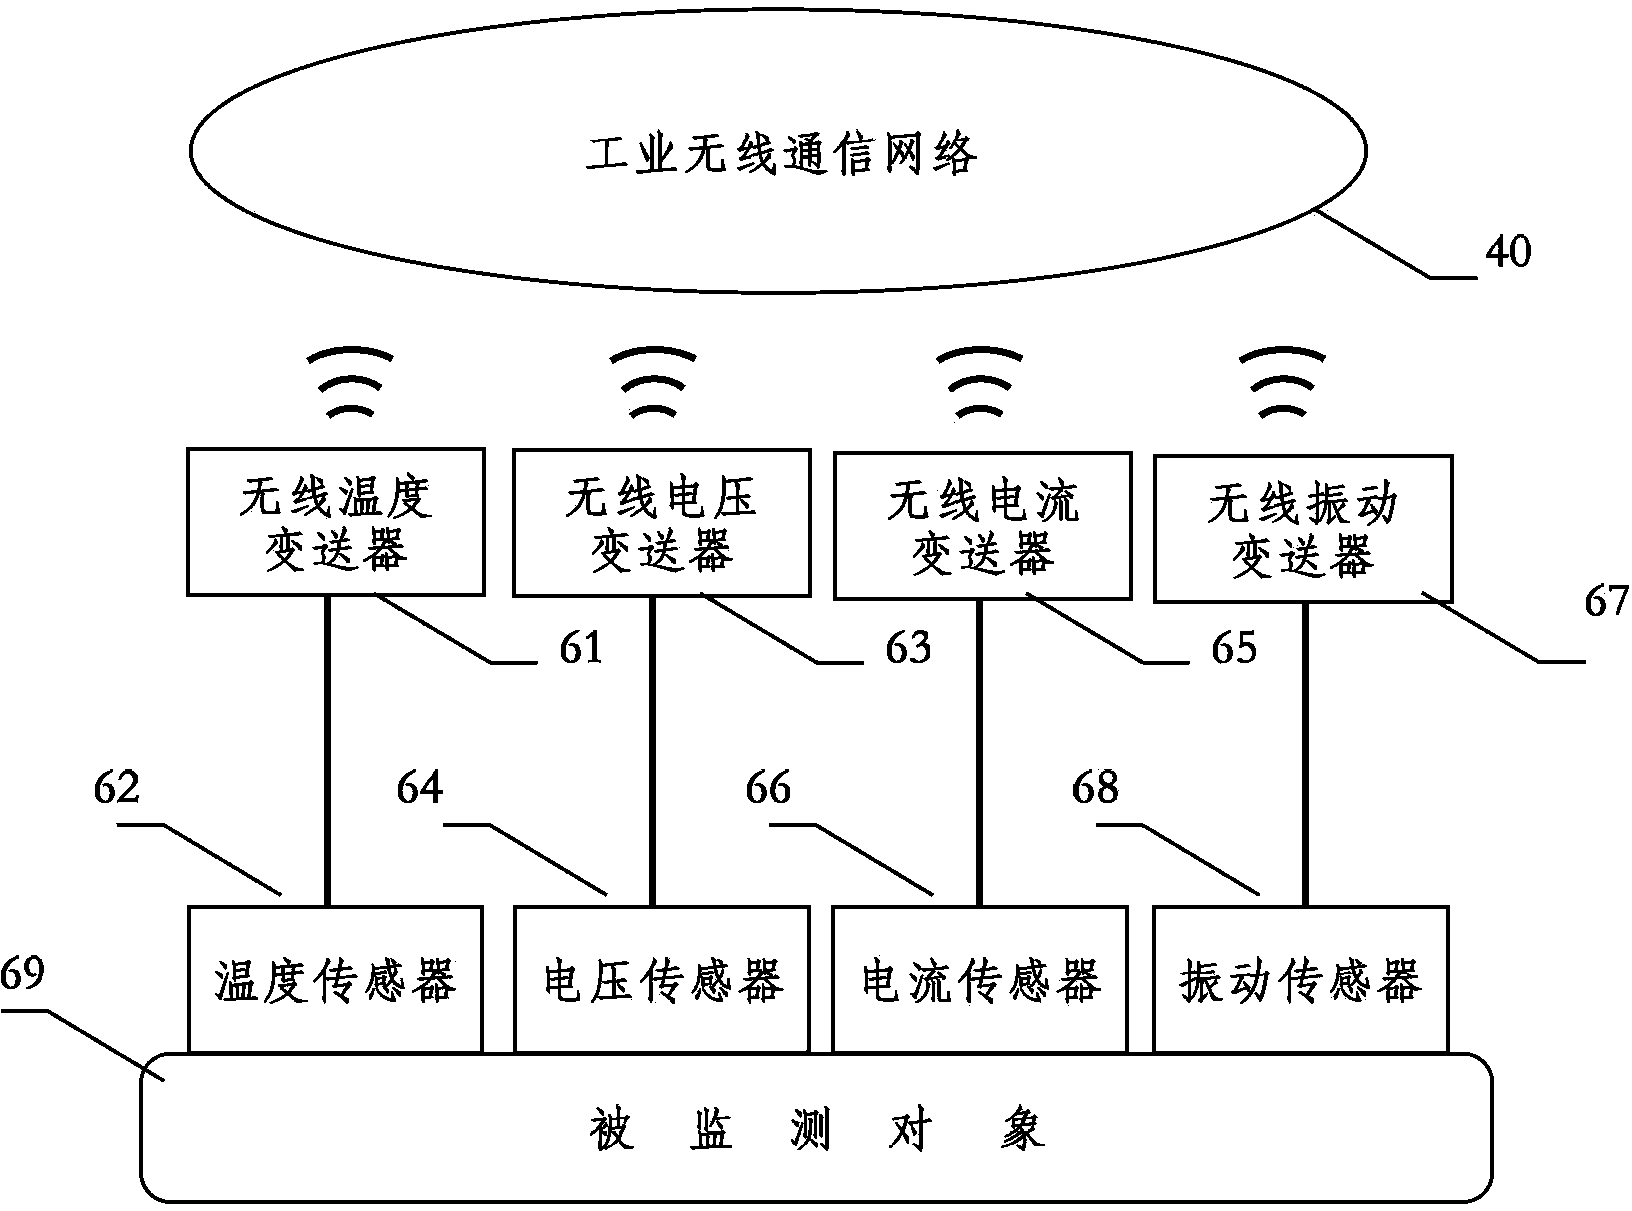 Device fault pre-maintenance method based on industrial wireless technology